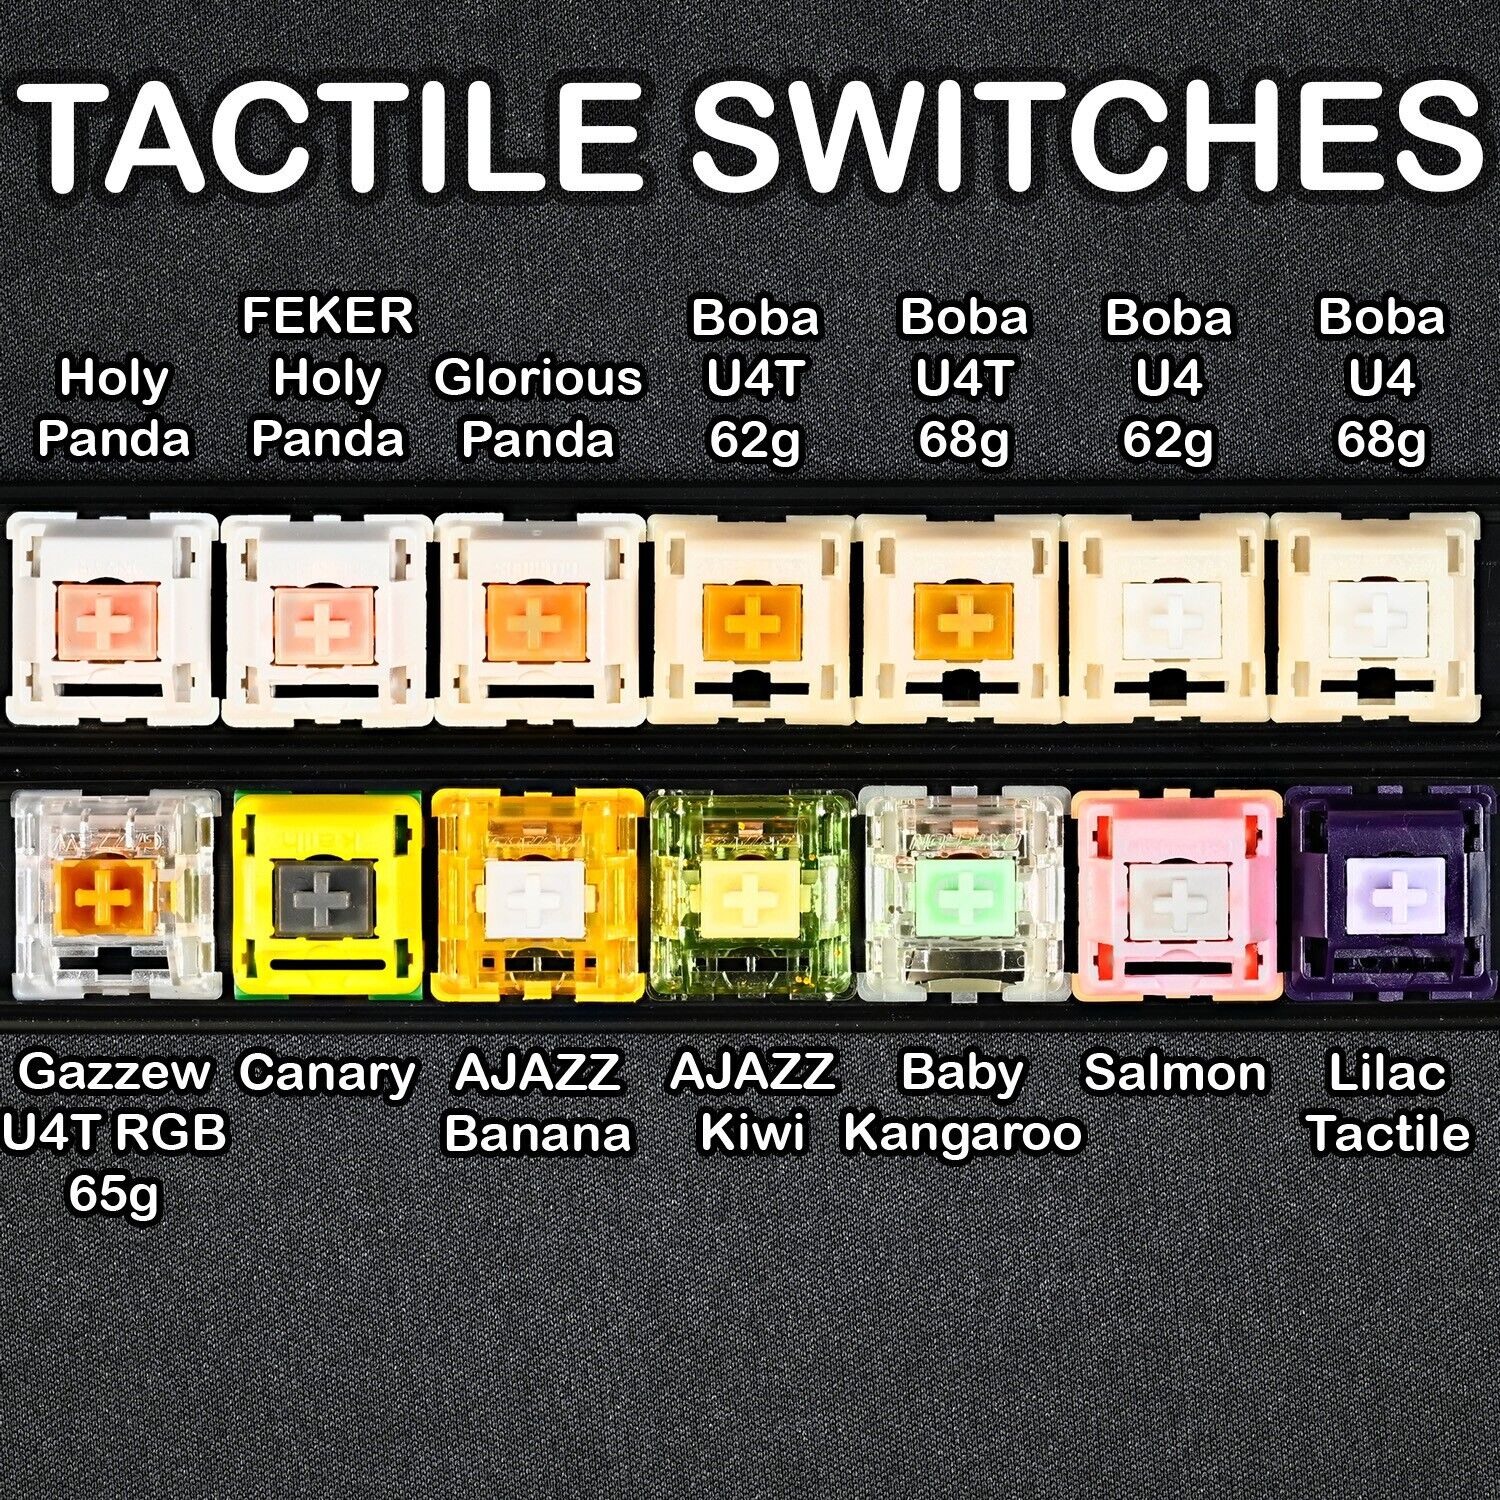 TACTILE Mechanical Keyboard SWITCH TESTER SAMPLE PACK - 14 Enthusiast Switches